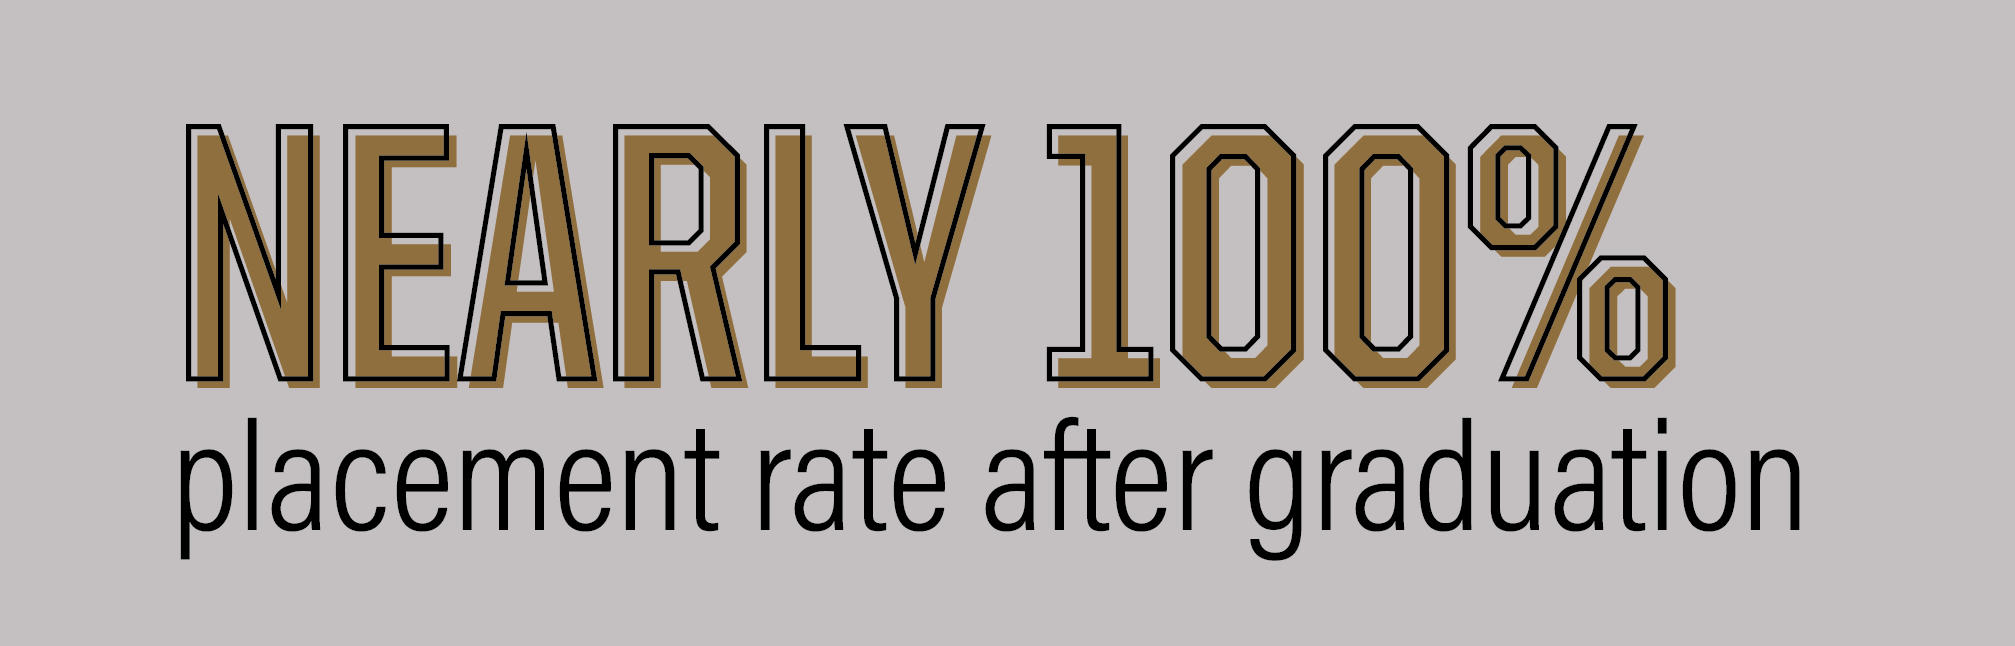 Infographic: Nearly 100% placement rate after graduation